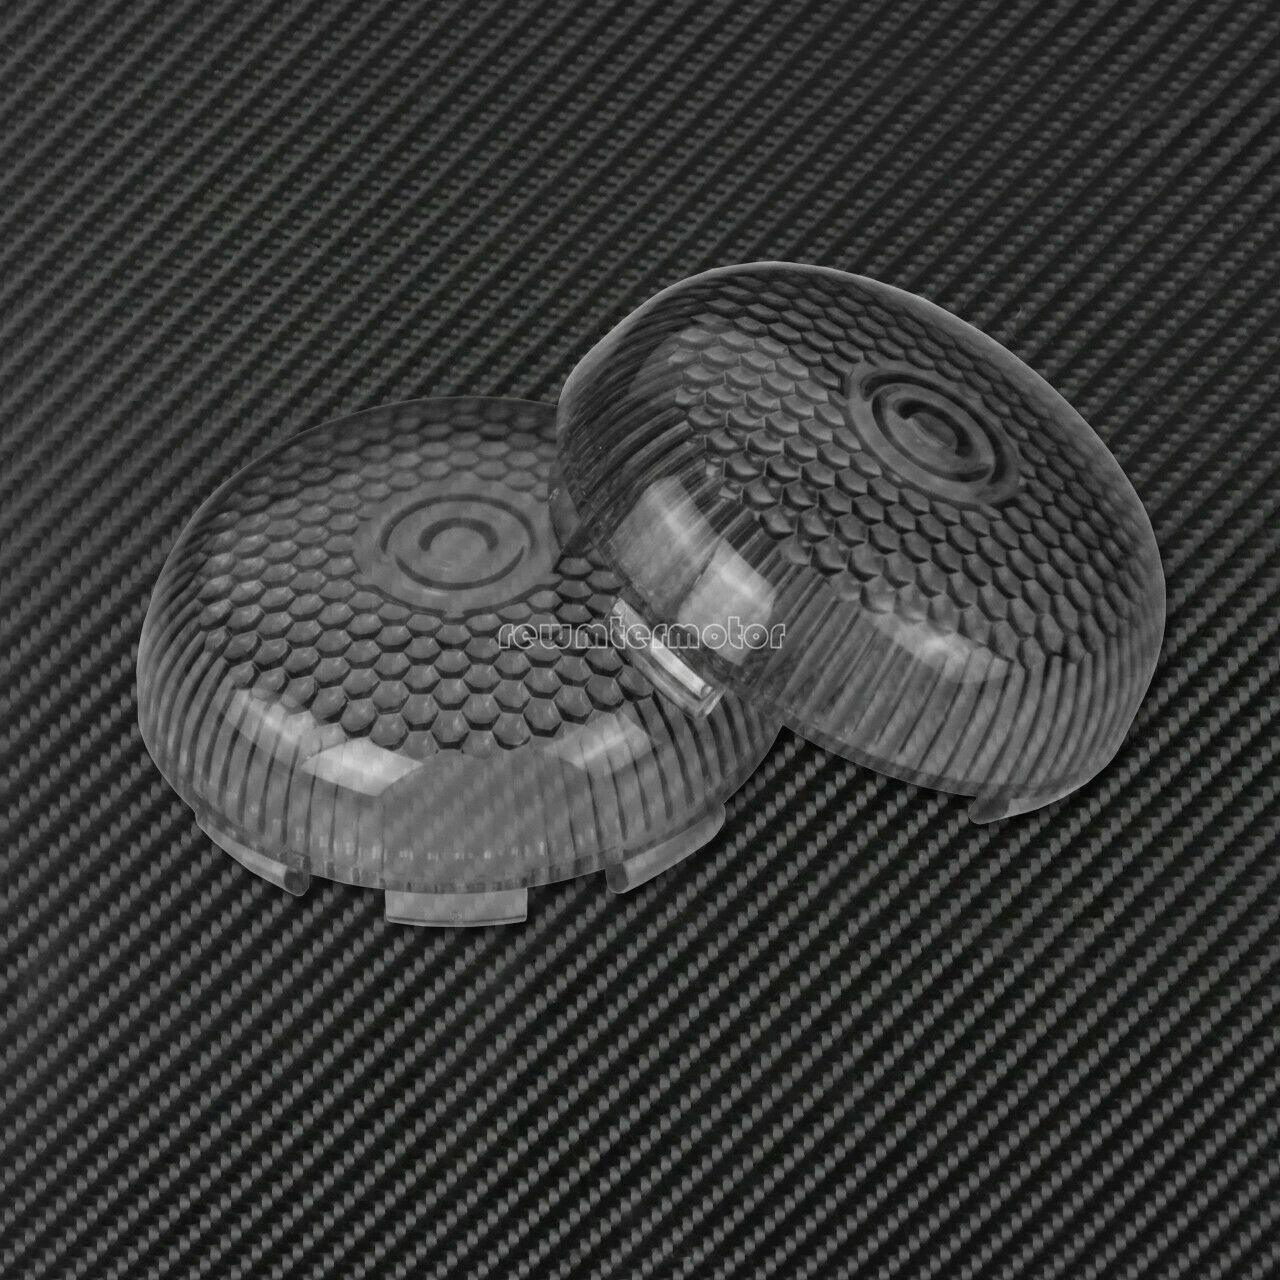 2x Smoke Bullet Turn Signals Light Lens Cover Fit For Harley FLRT FLTRX 2000-20 - Moto Life Products